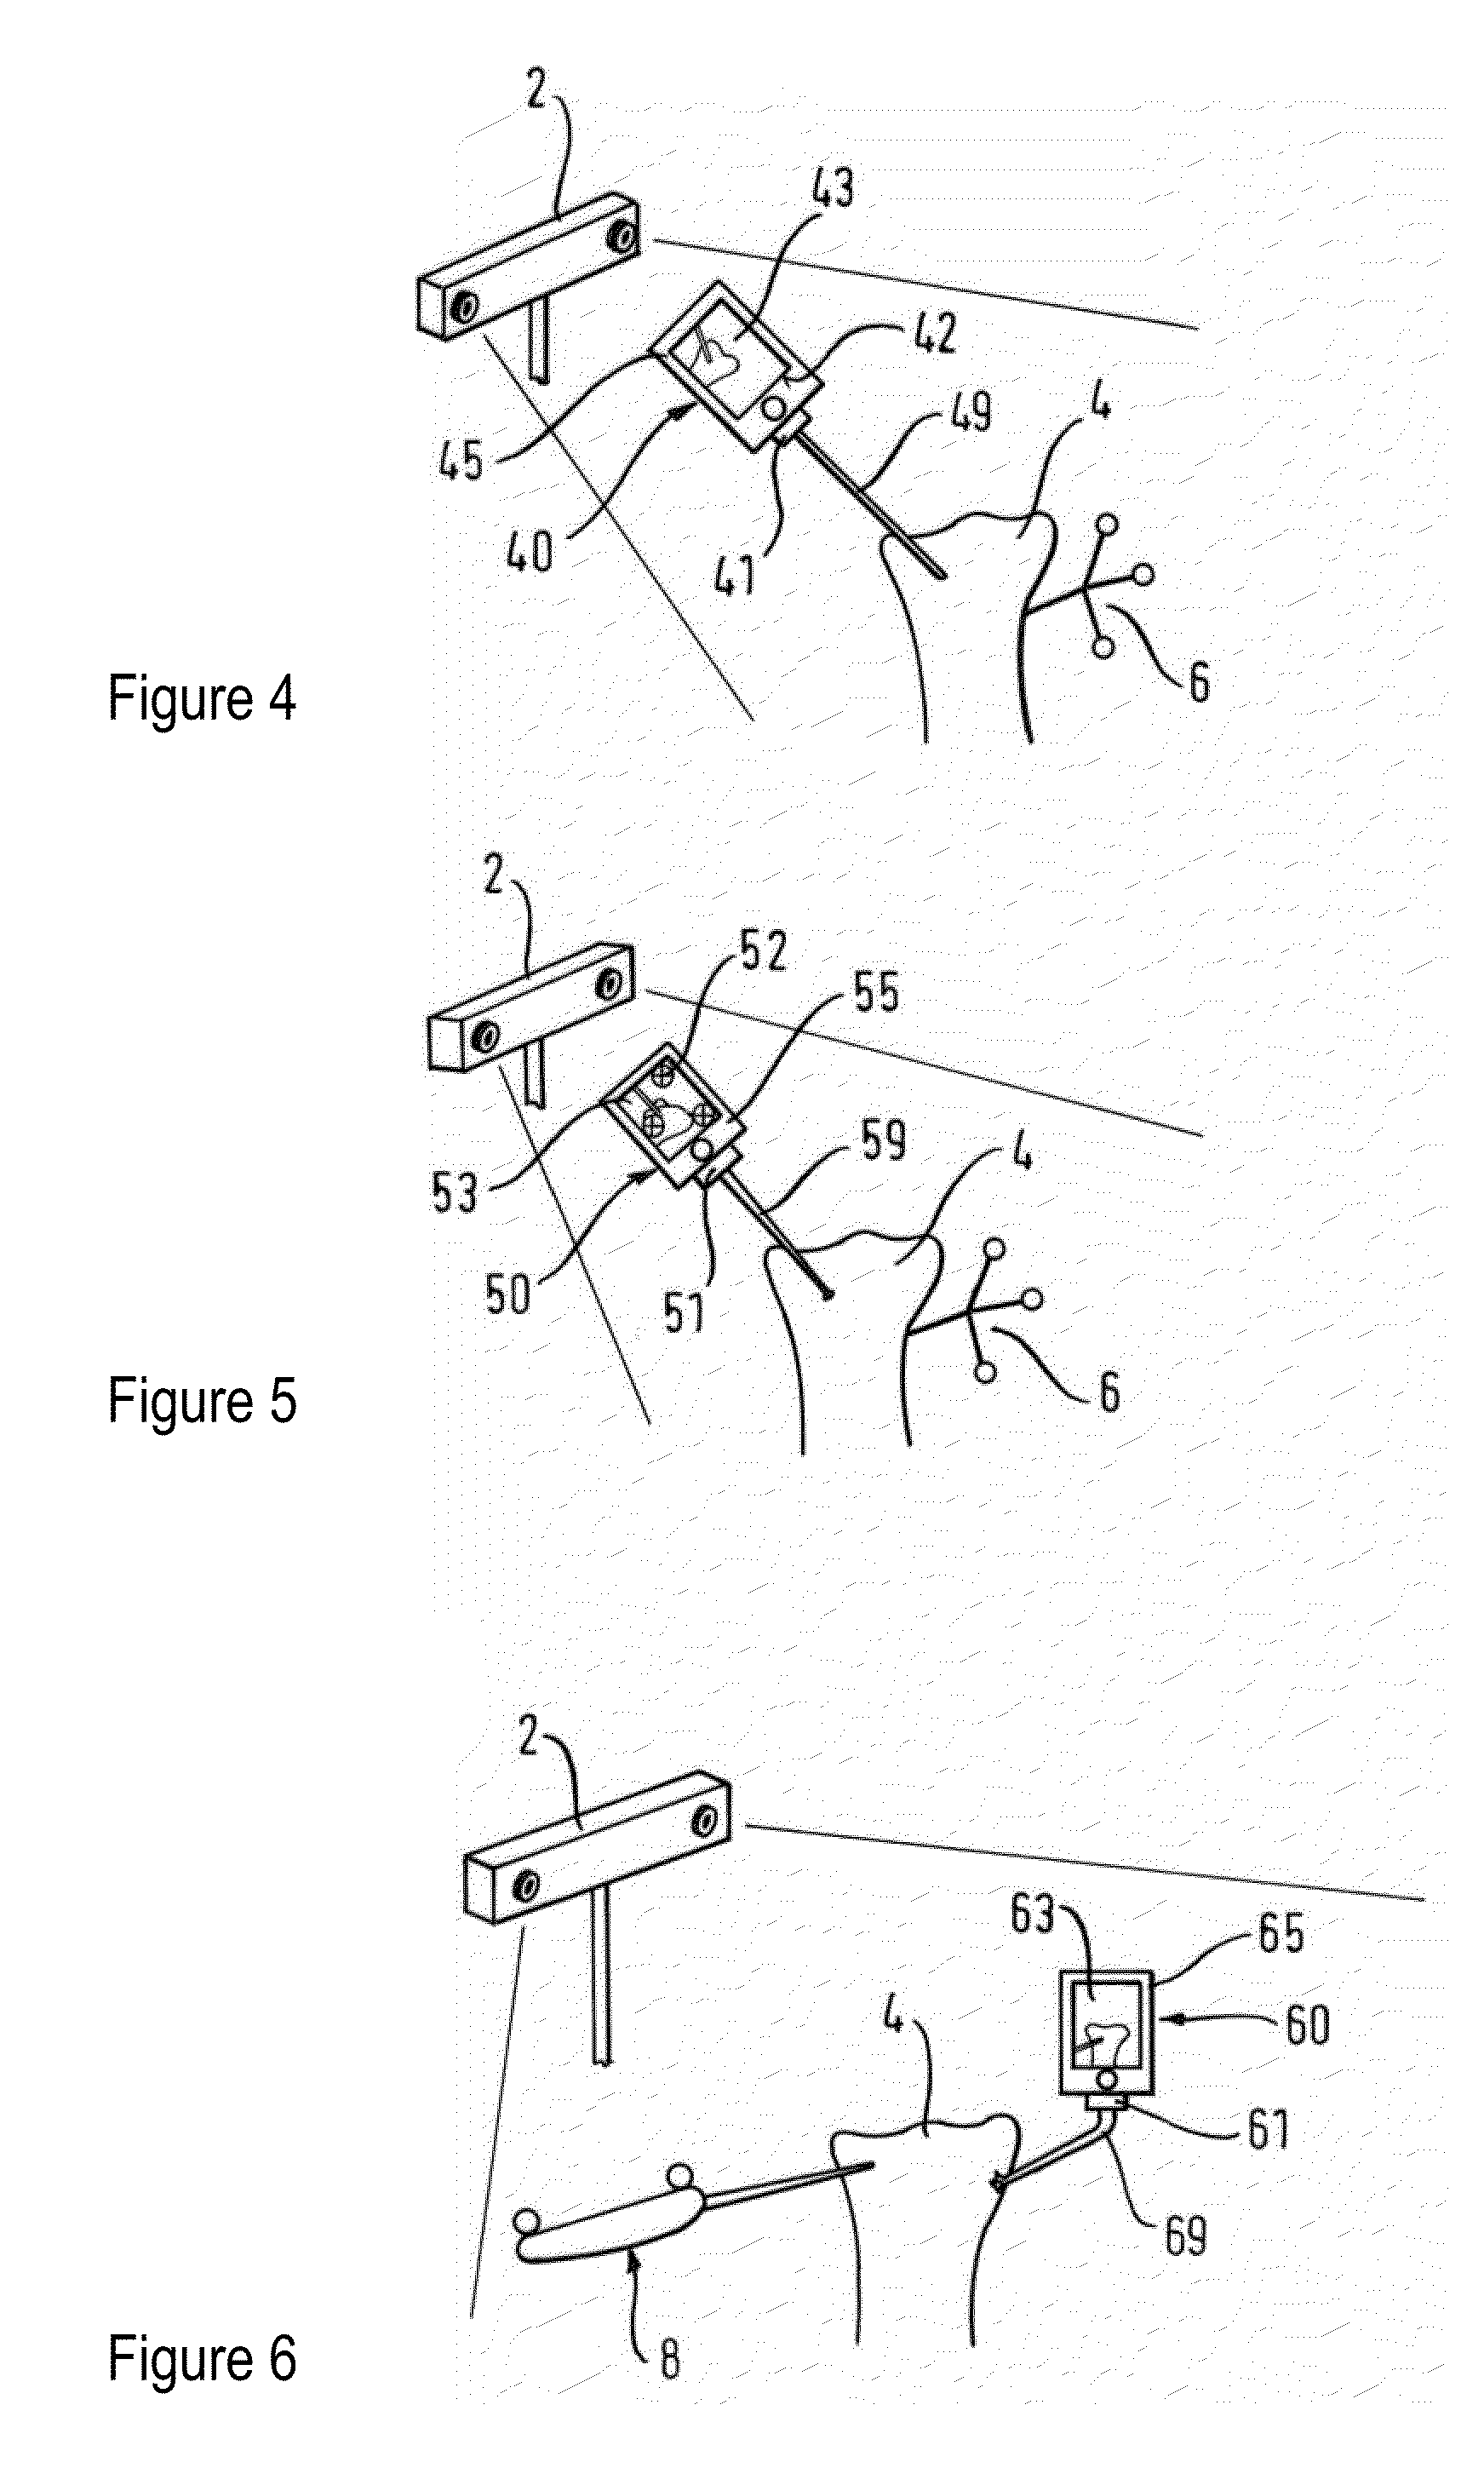 Integration of surgical instrument and display device for assisting in image-guided surgery